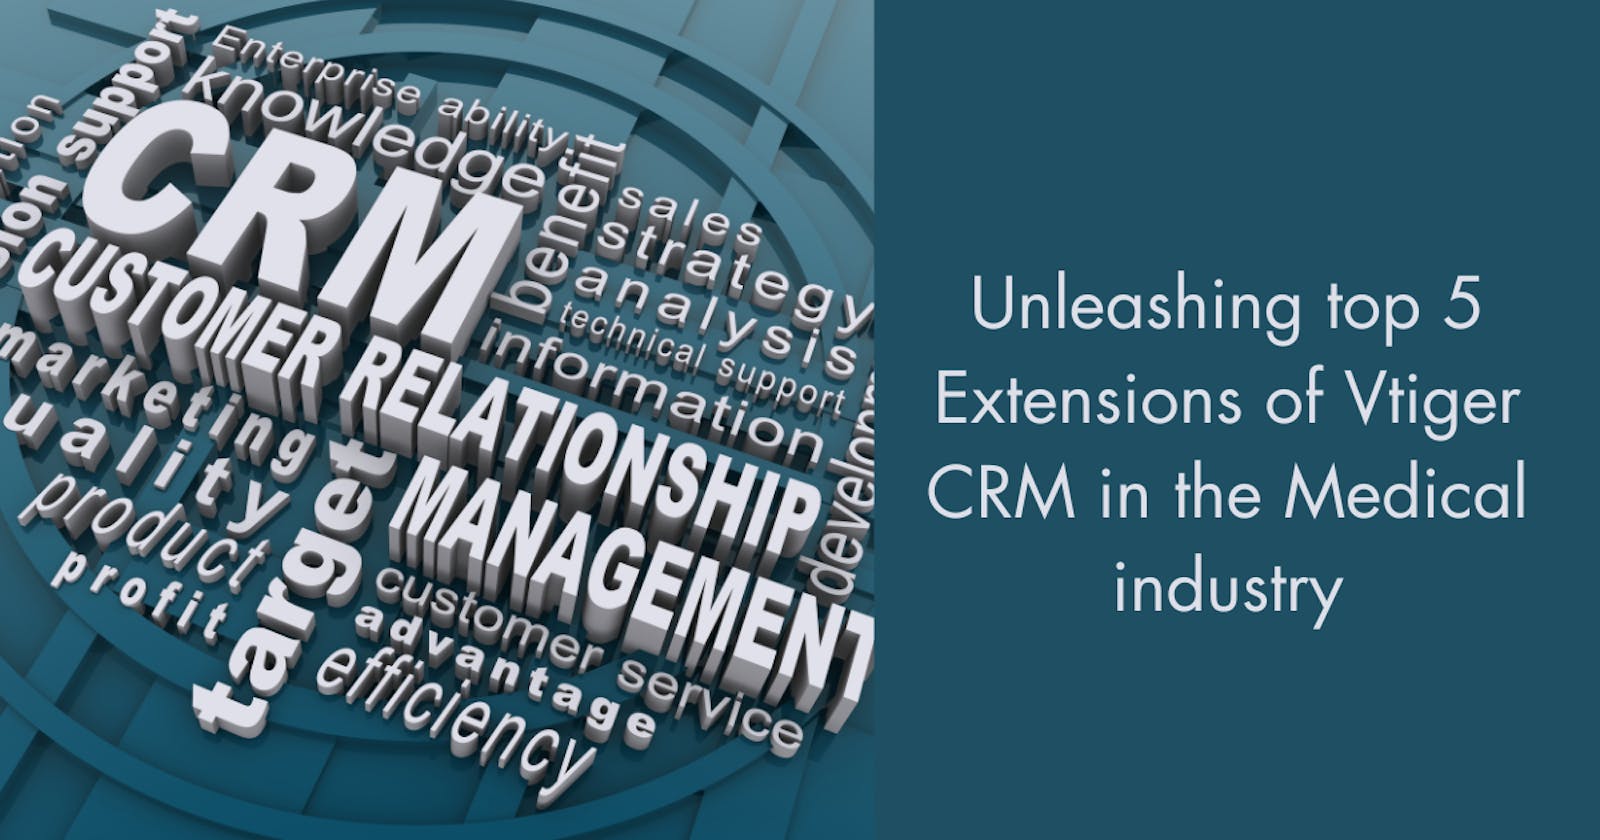 Unleashing top 5 Extensions of Vtiger CRM in the Medical industry